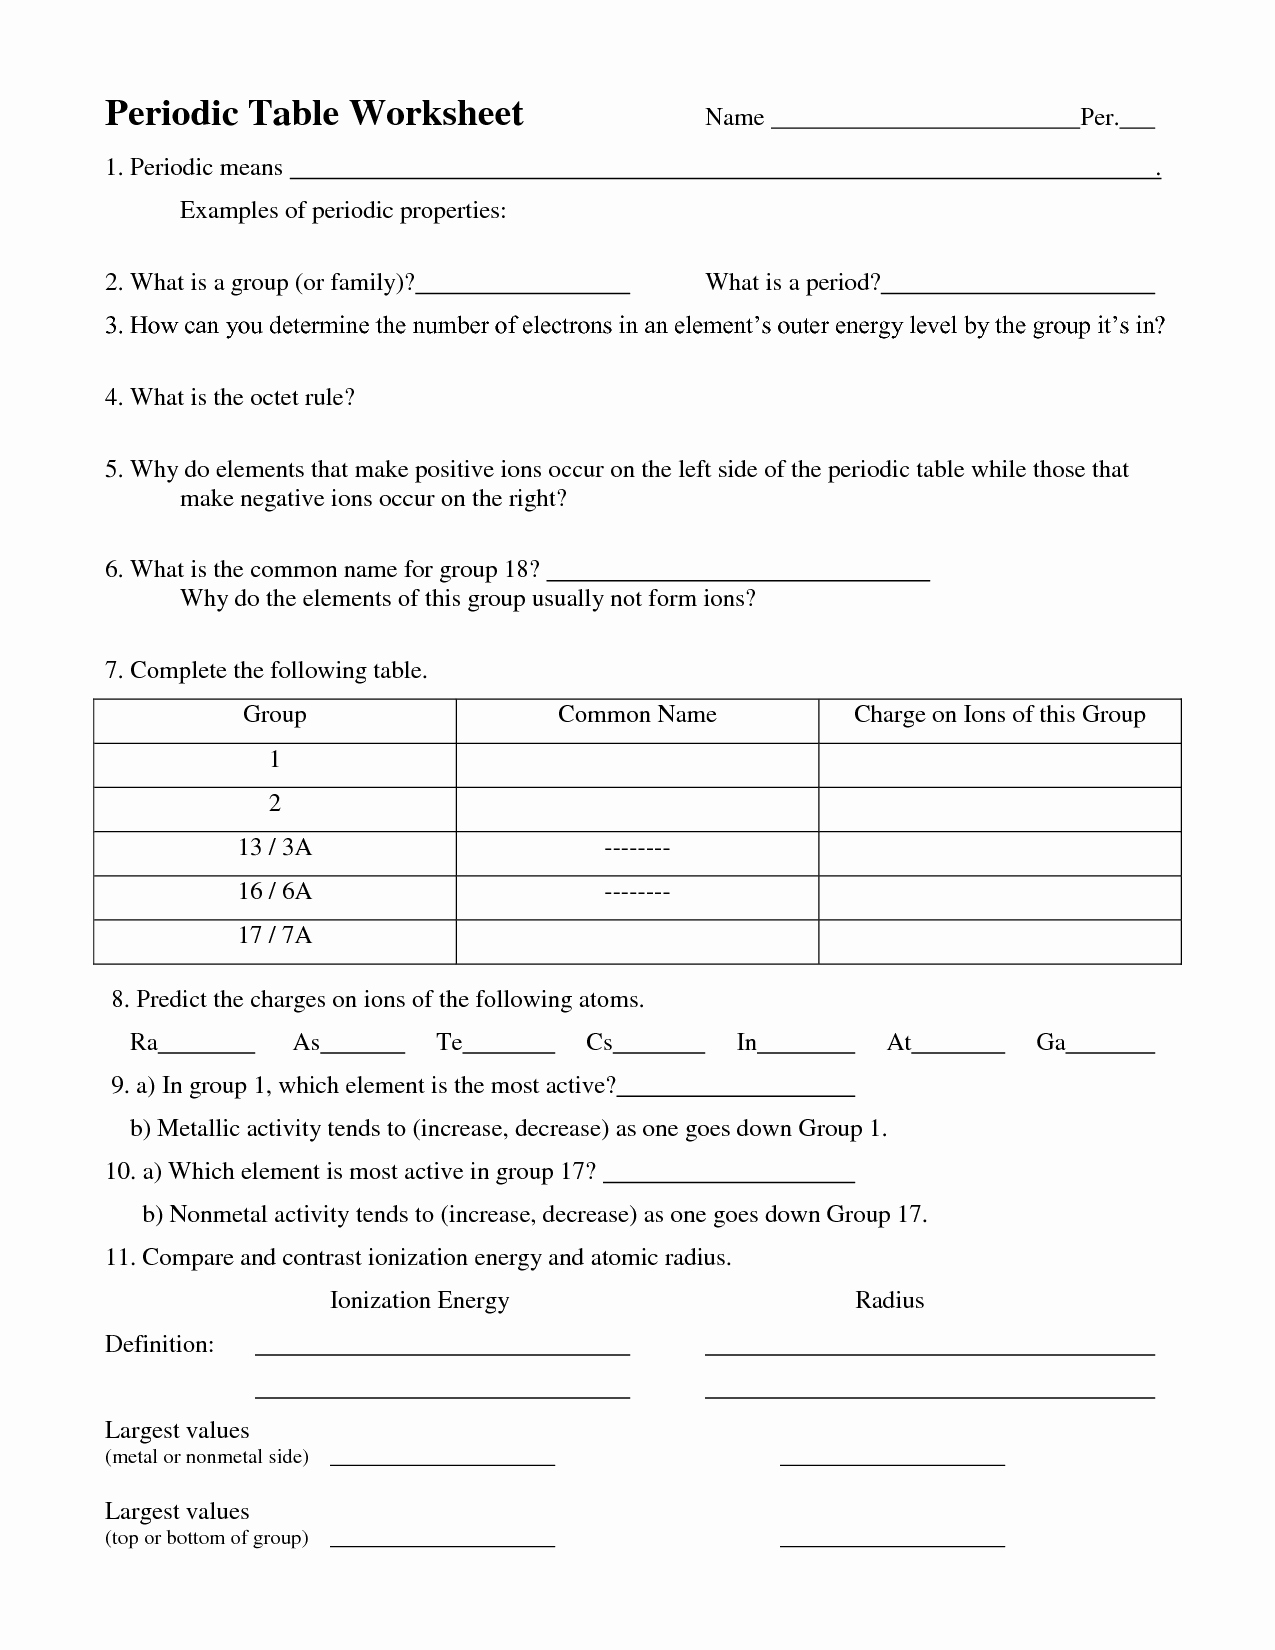 Periodic Table Worksheet Answers Best Of 8 Best Of Chemistry Review Worksheets Periodic